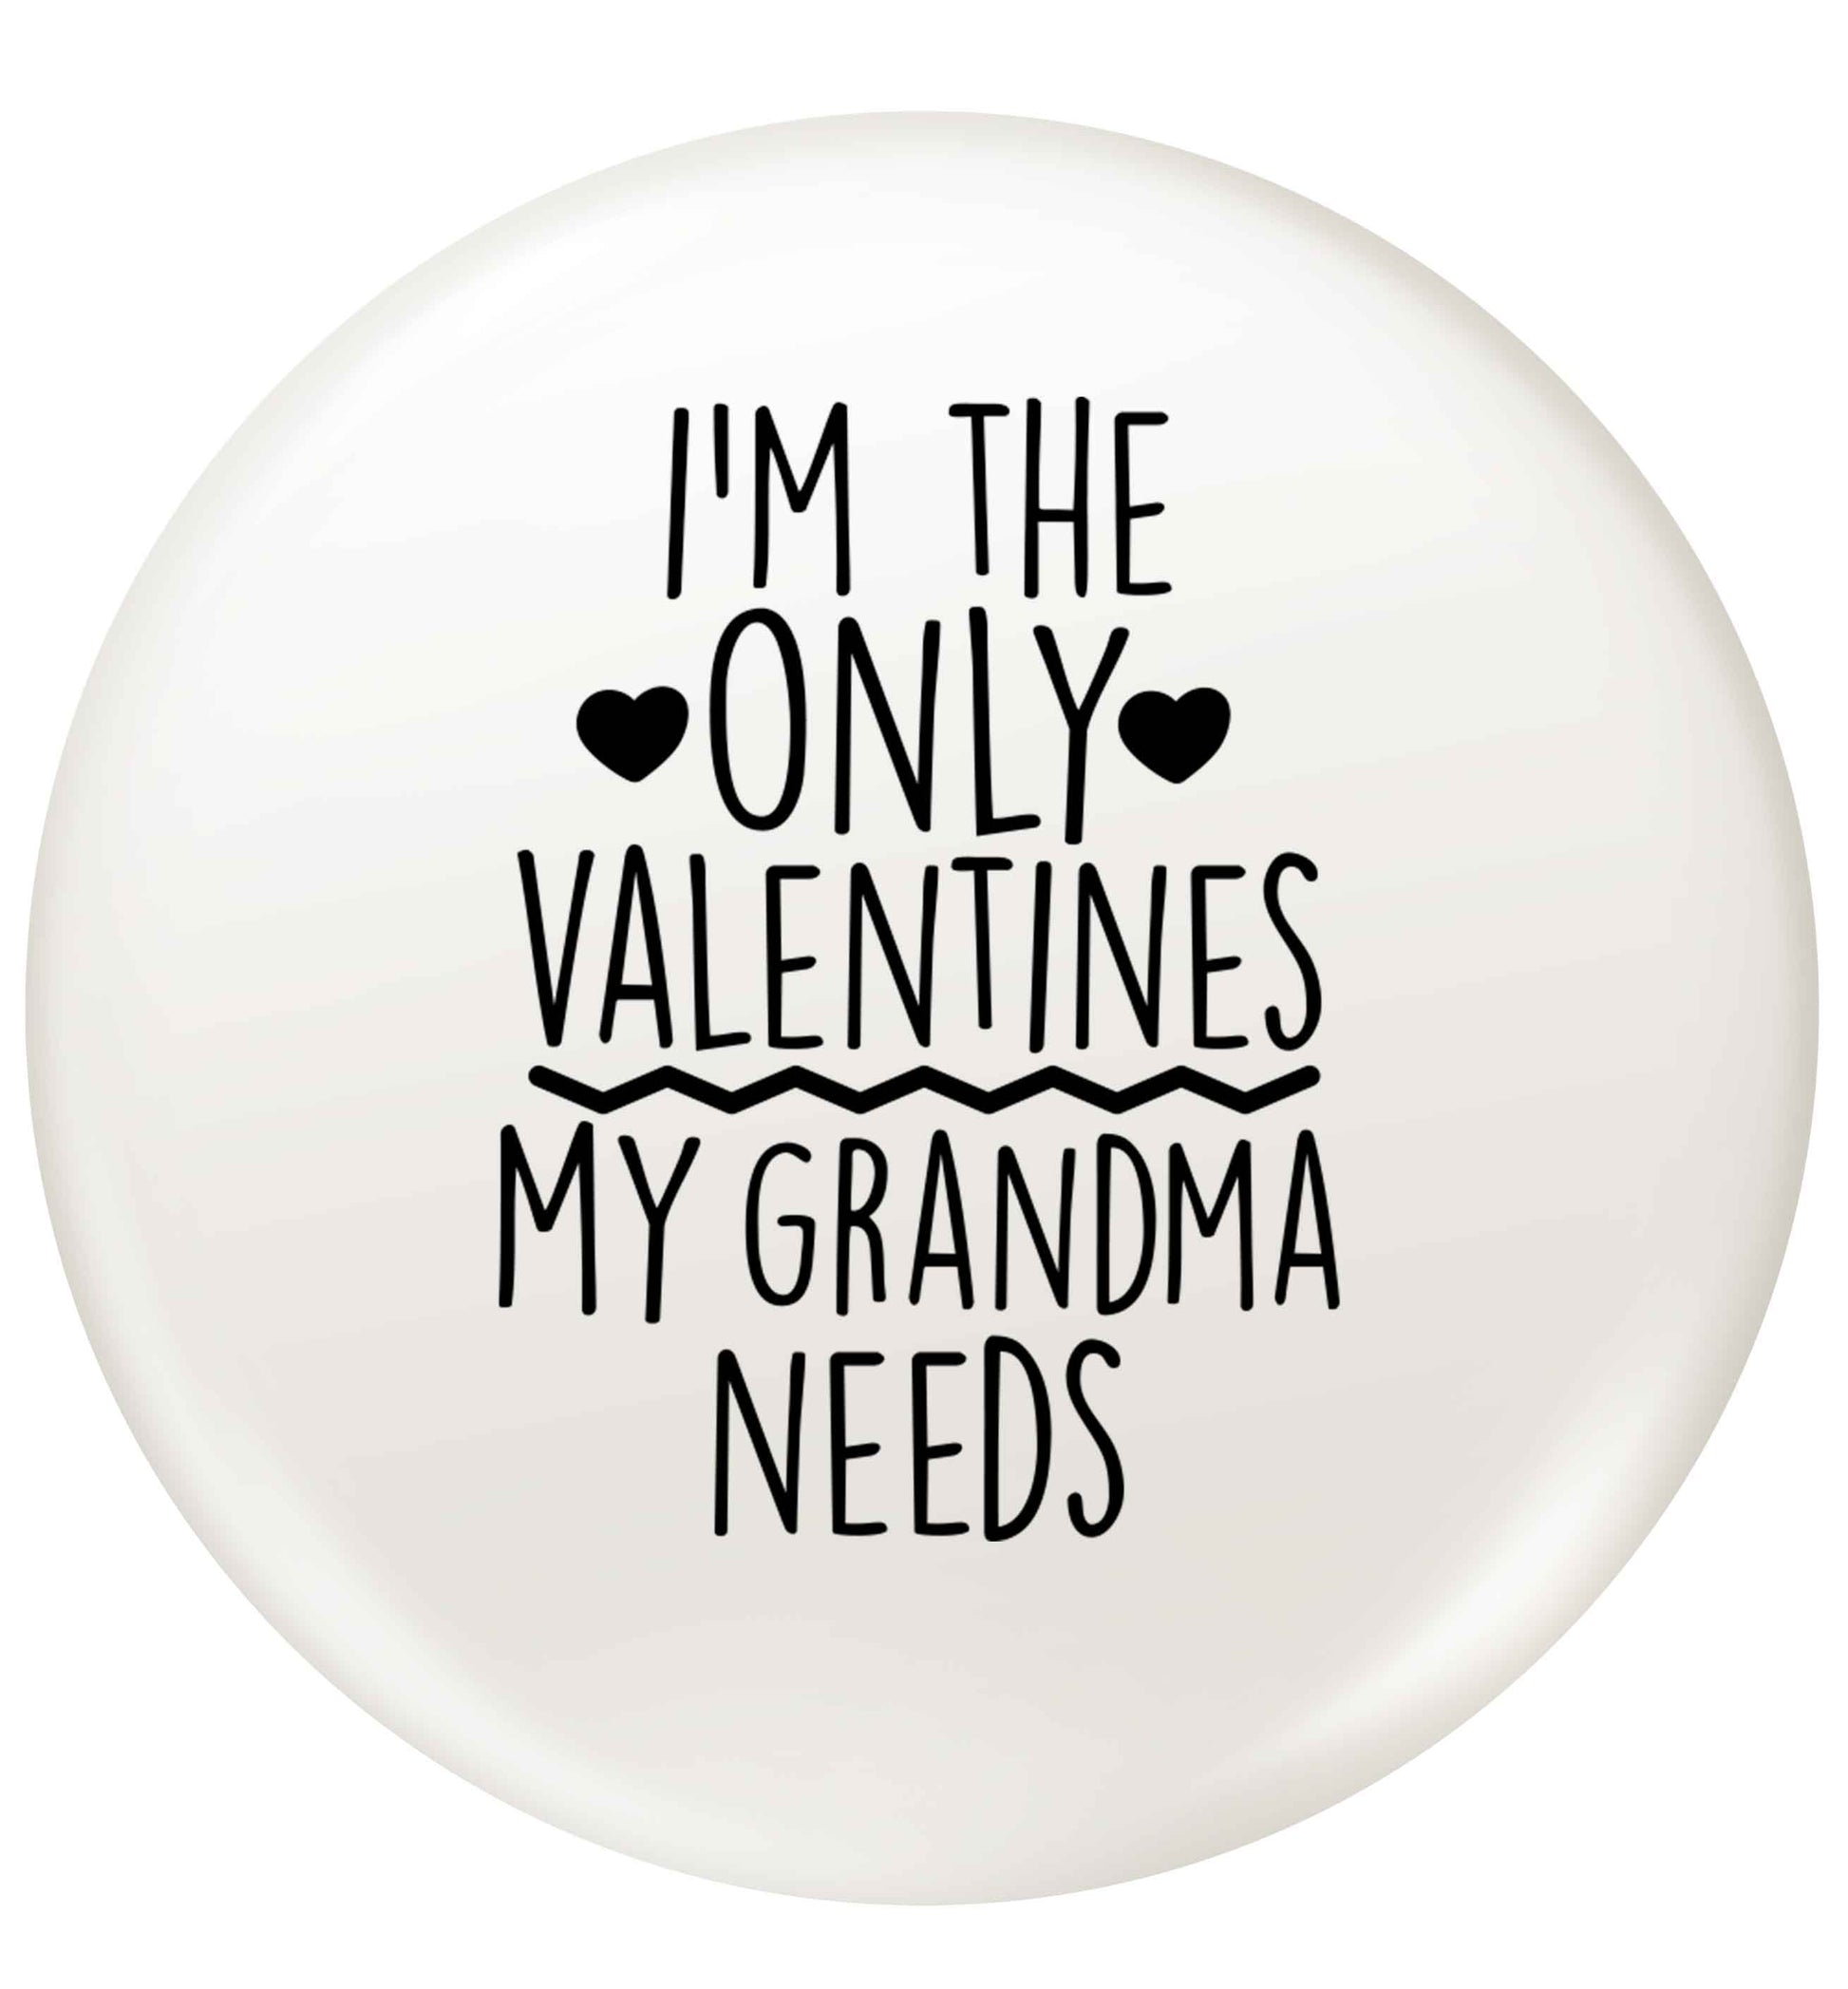 I'm the only valentines my grandma needs small 25mm Pin badge